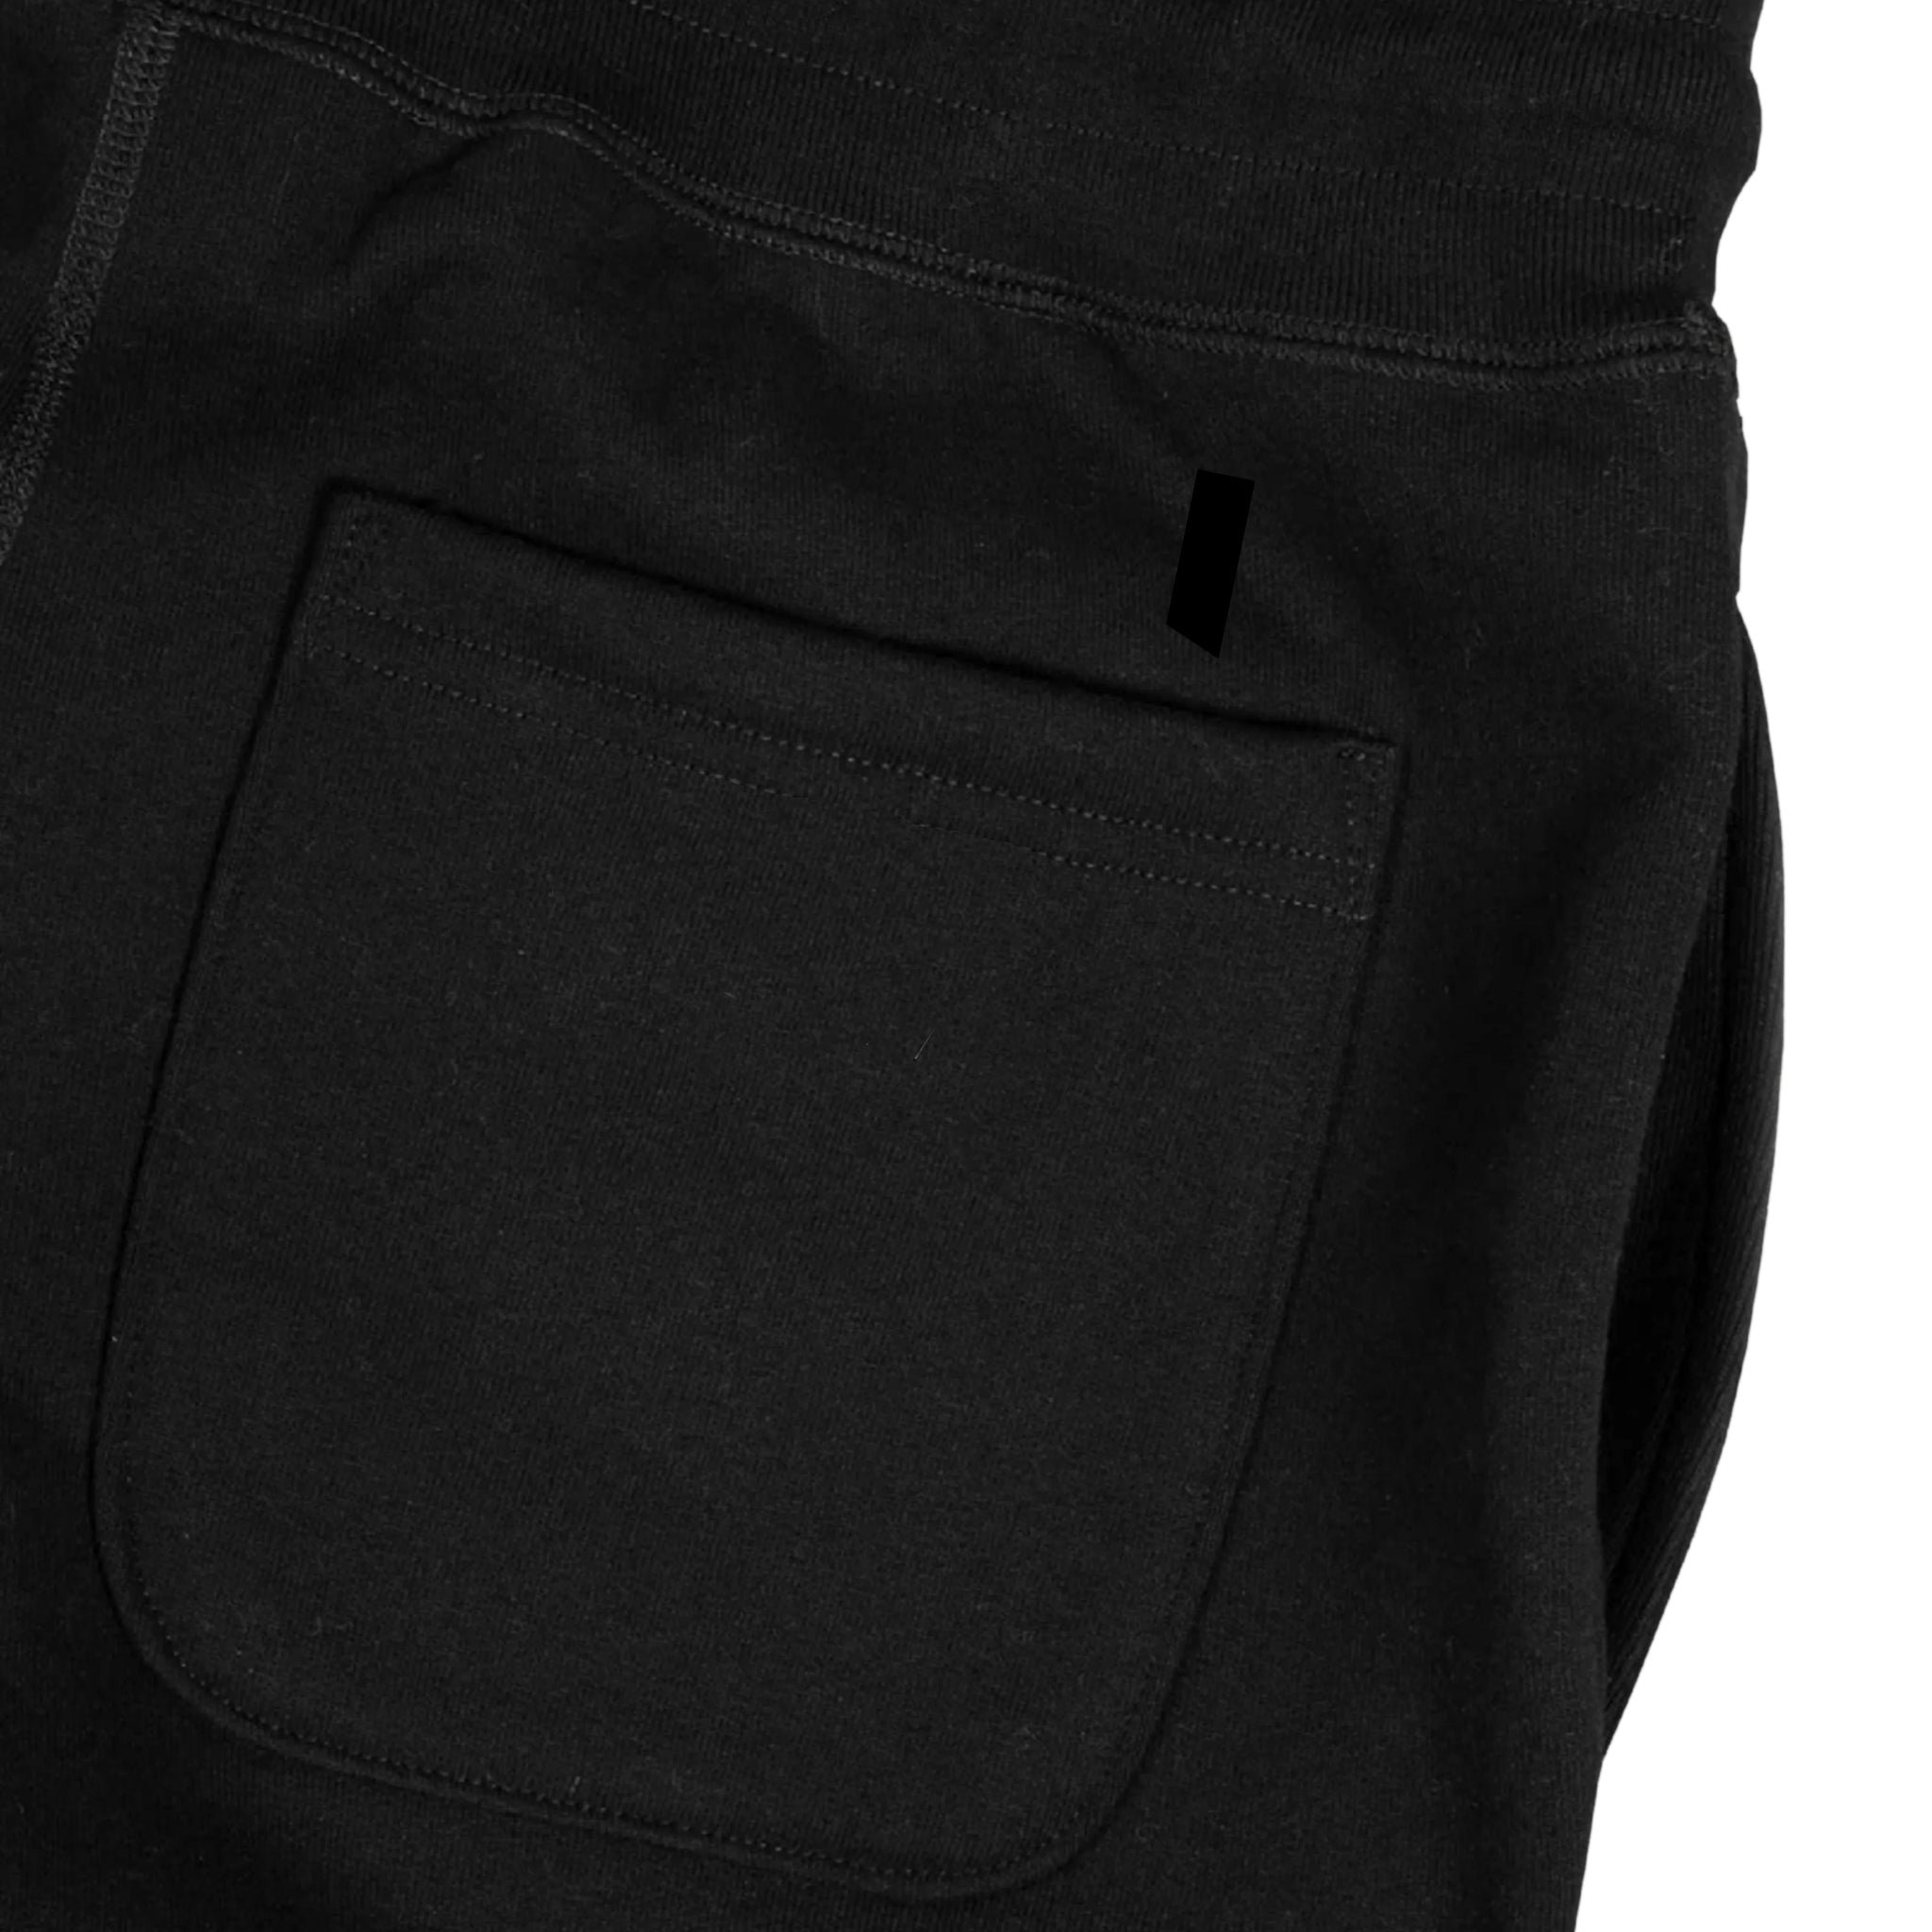 pocket close up view of black heavyweight knit joggers against white background